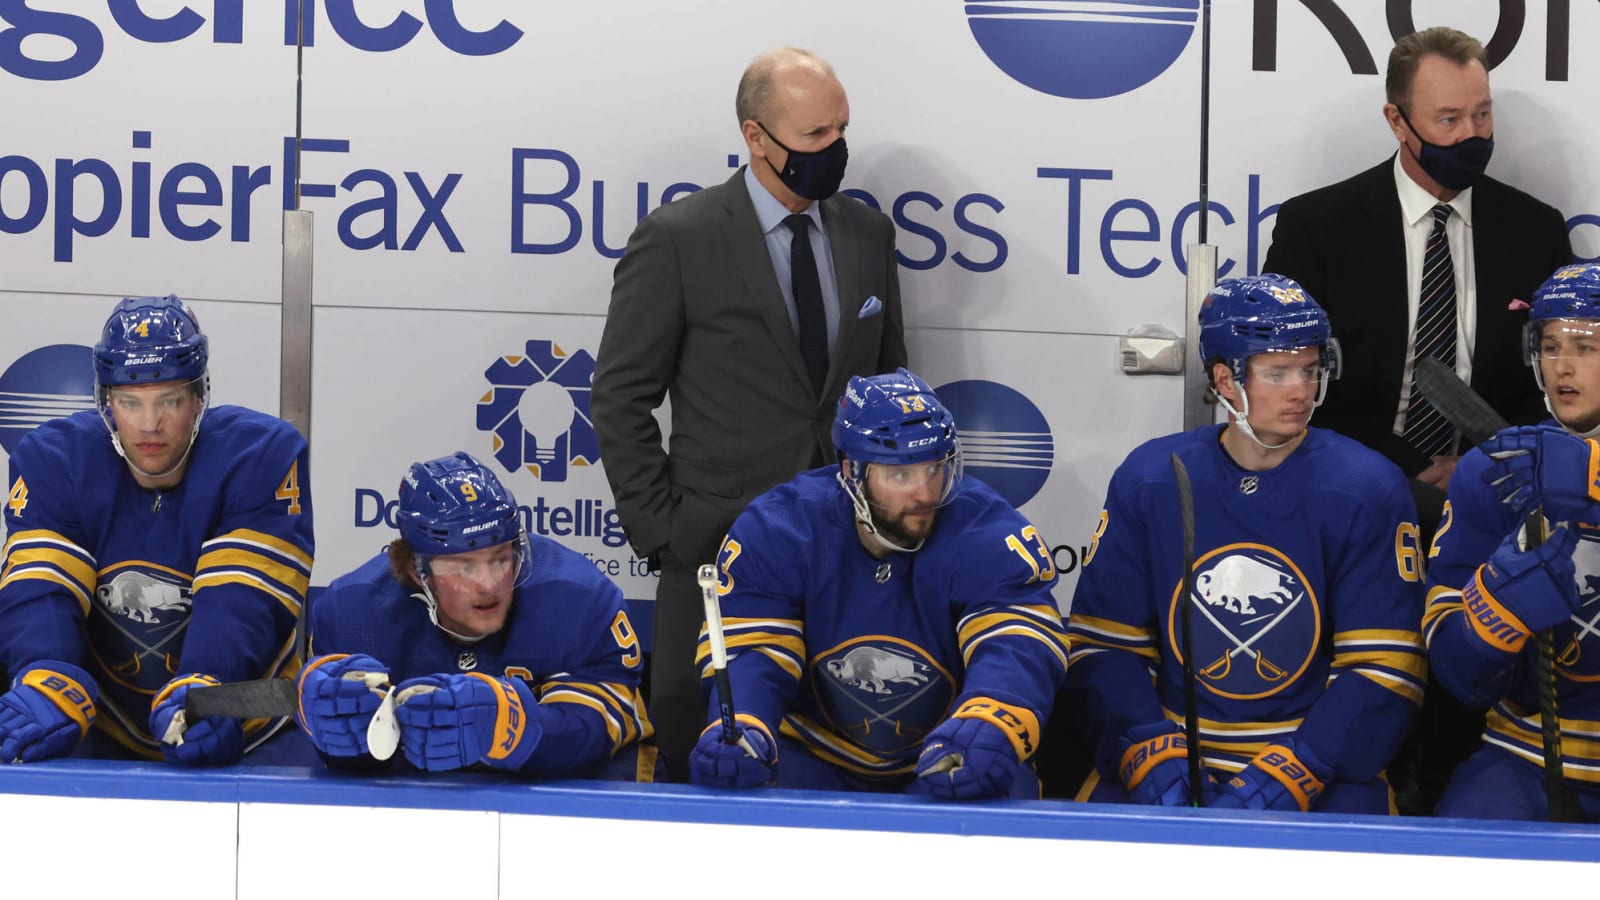 Sabres coach Ralph Krueger tests positive for COVID-19